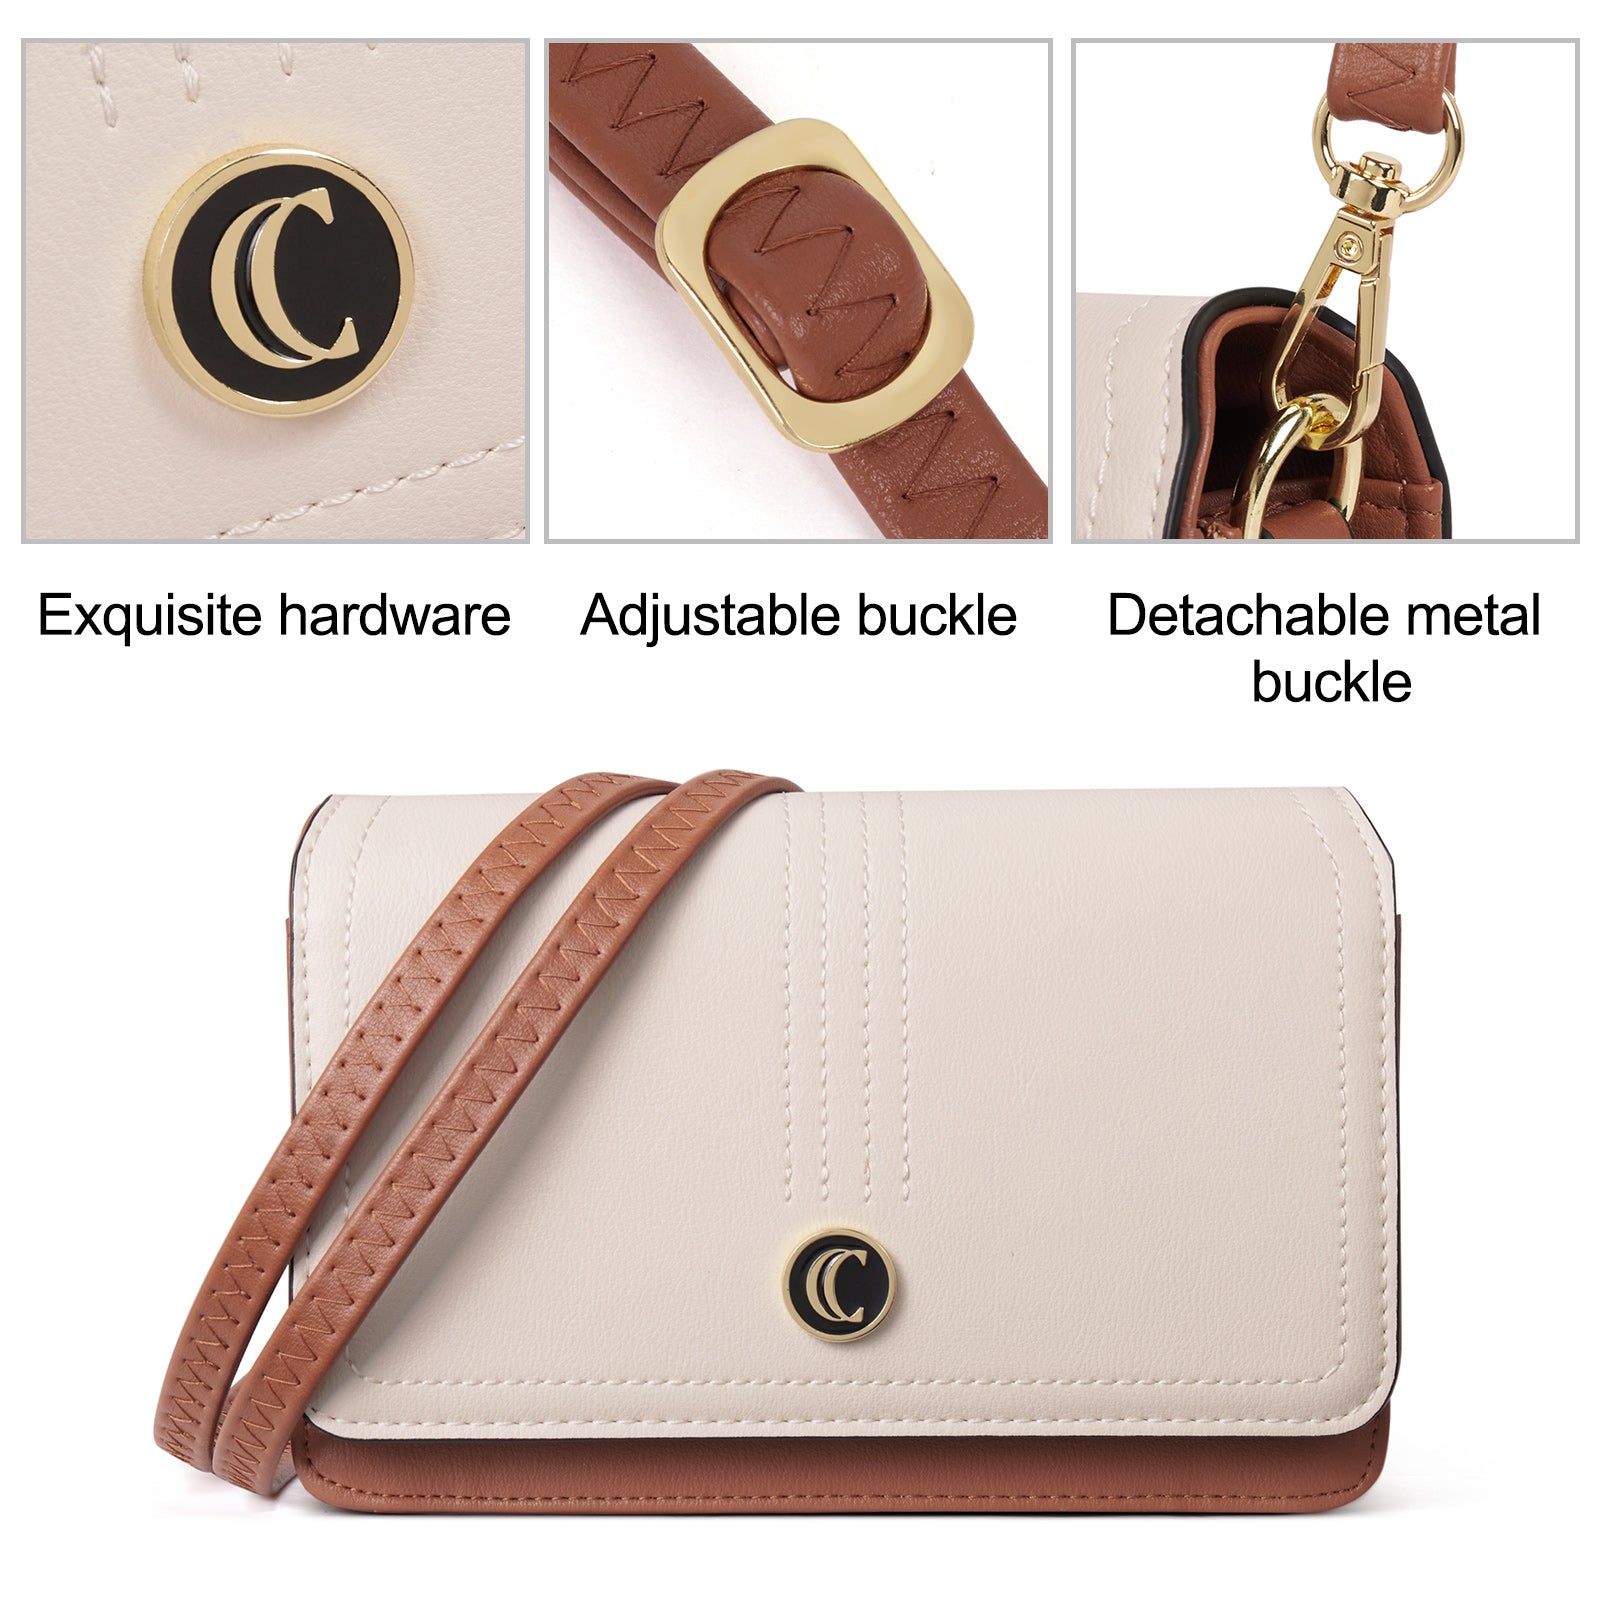 CLUCI Crossbody Purse for Women, Wristlet Wallet, Small Shoulder Bag with Card Slots, Leather Flap Cell phone Clutch